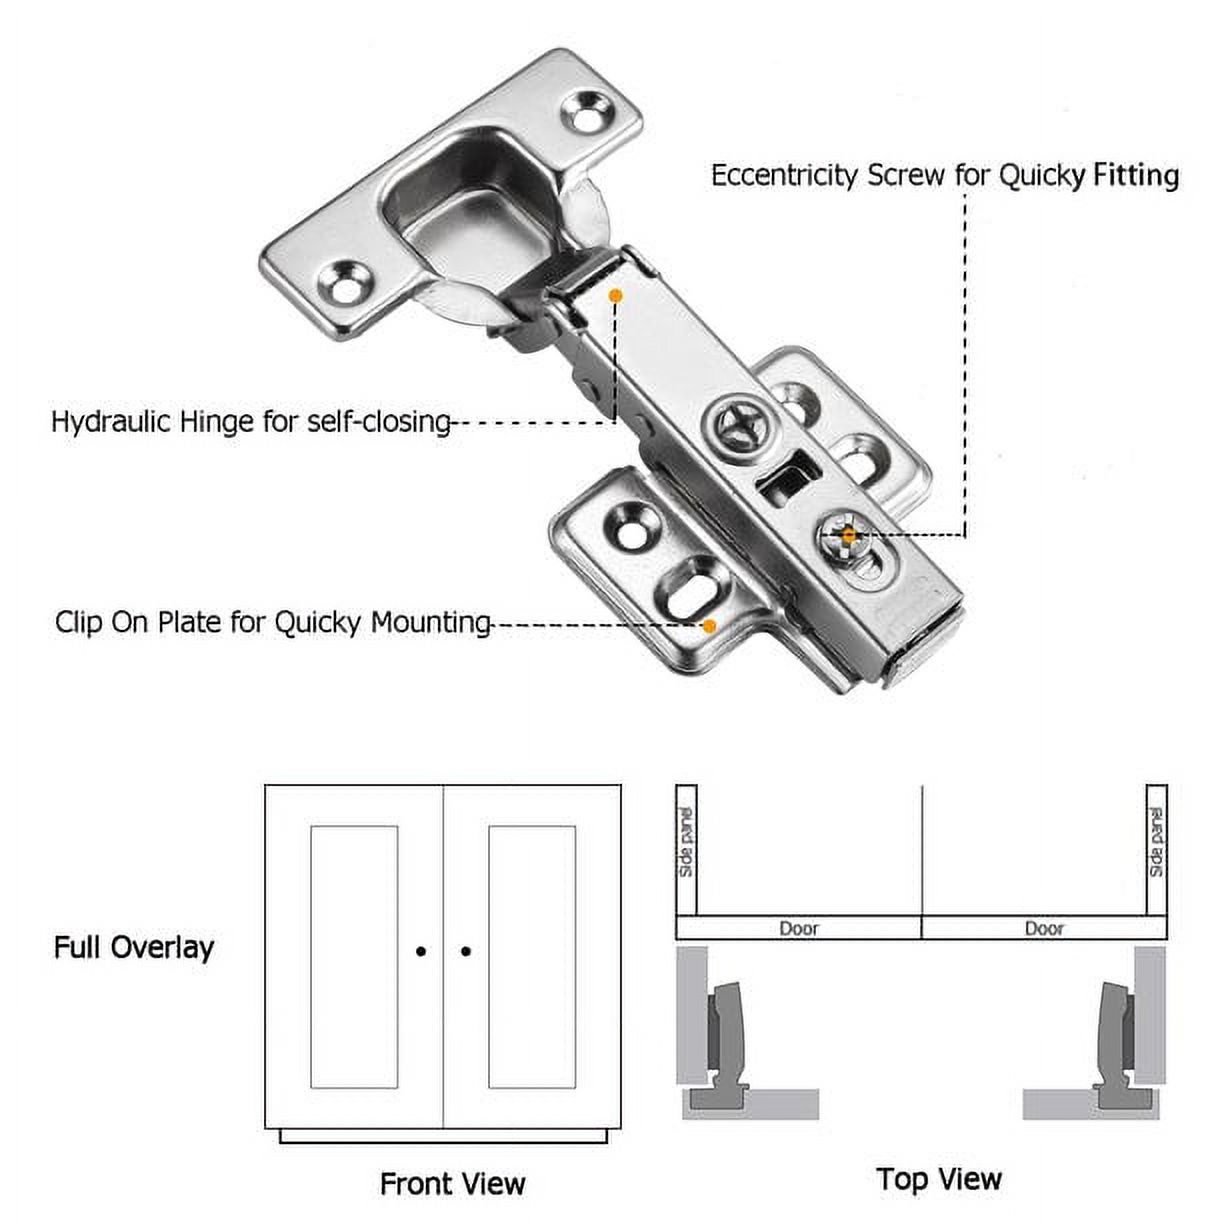 Luokim 20pcs Standard Cabinet Hinge,Fit for Frameless Cabinet,European Full Overlay,Soft Closing,Four-Hole mounting Plate Hinges,Nickel Plated Finish - image 5 of 7